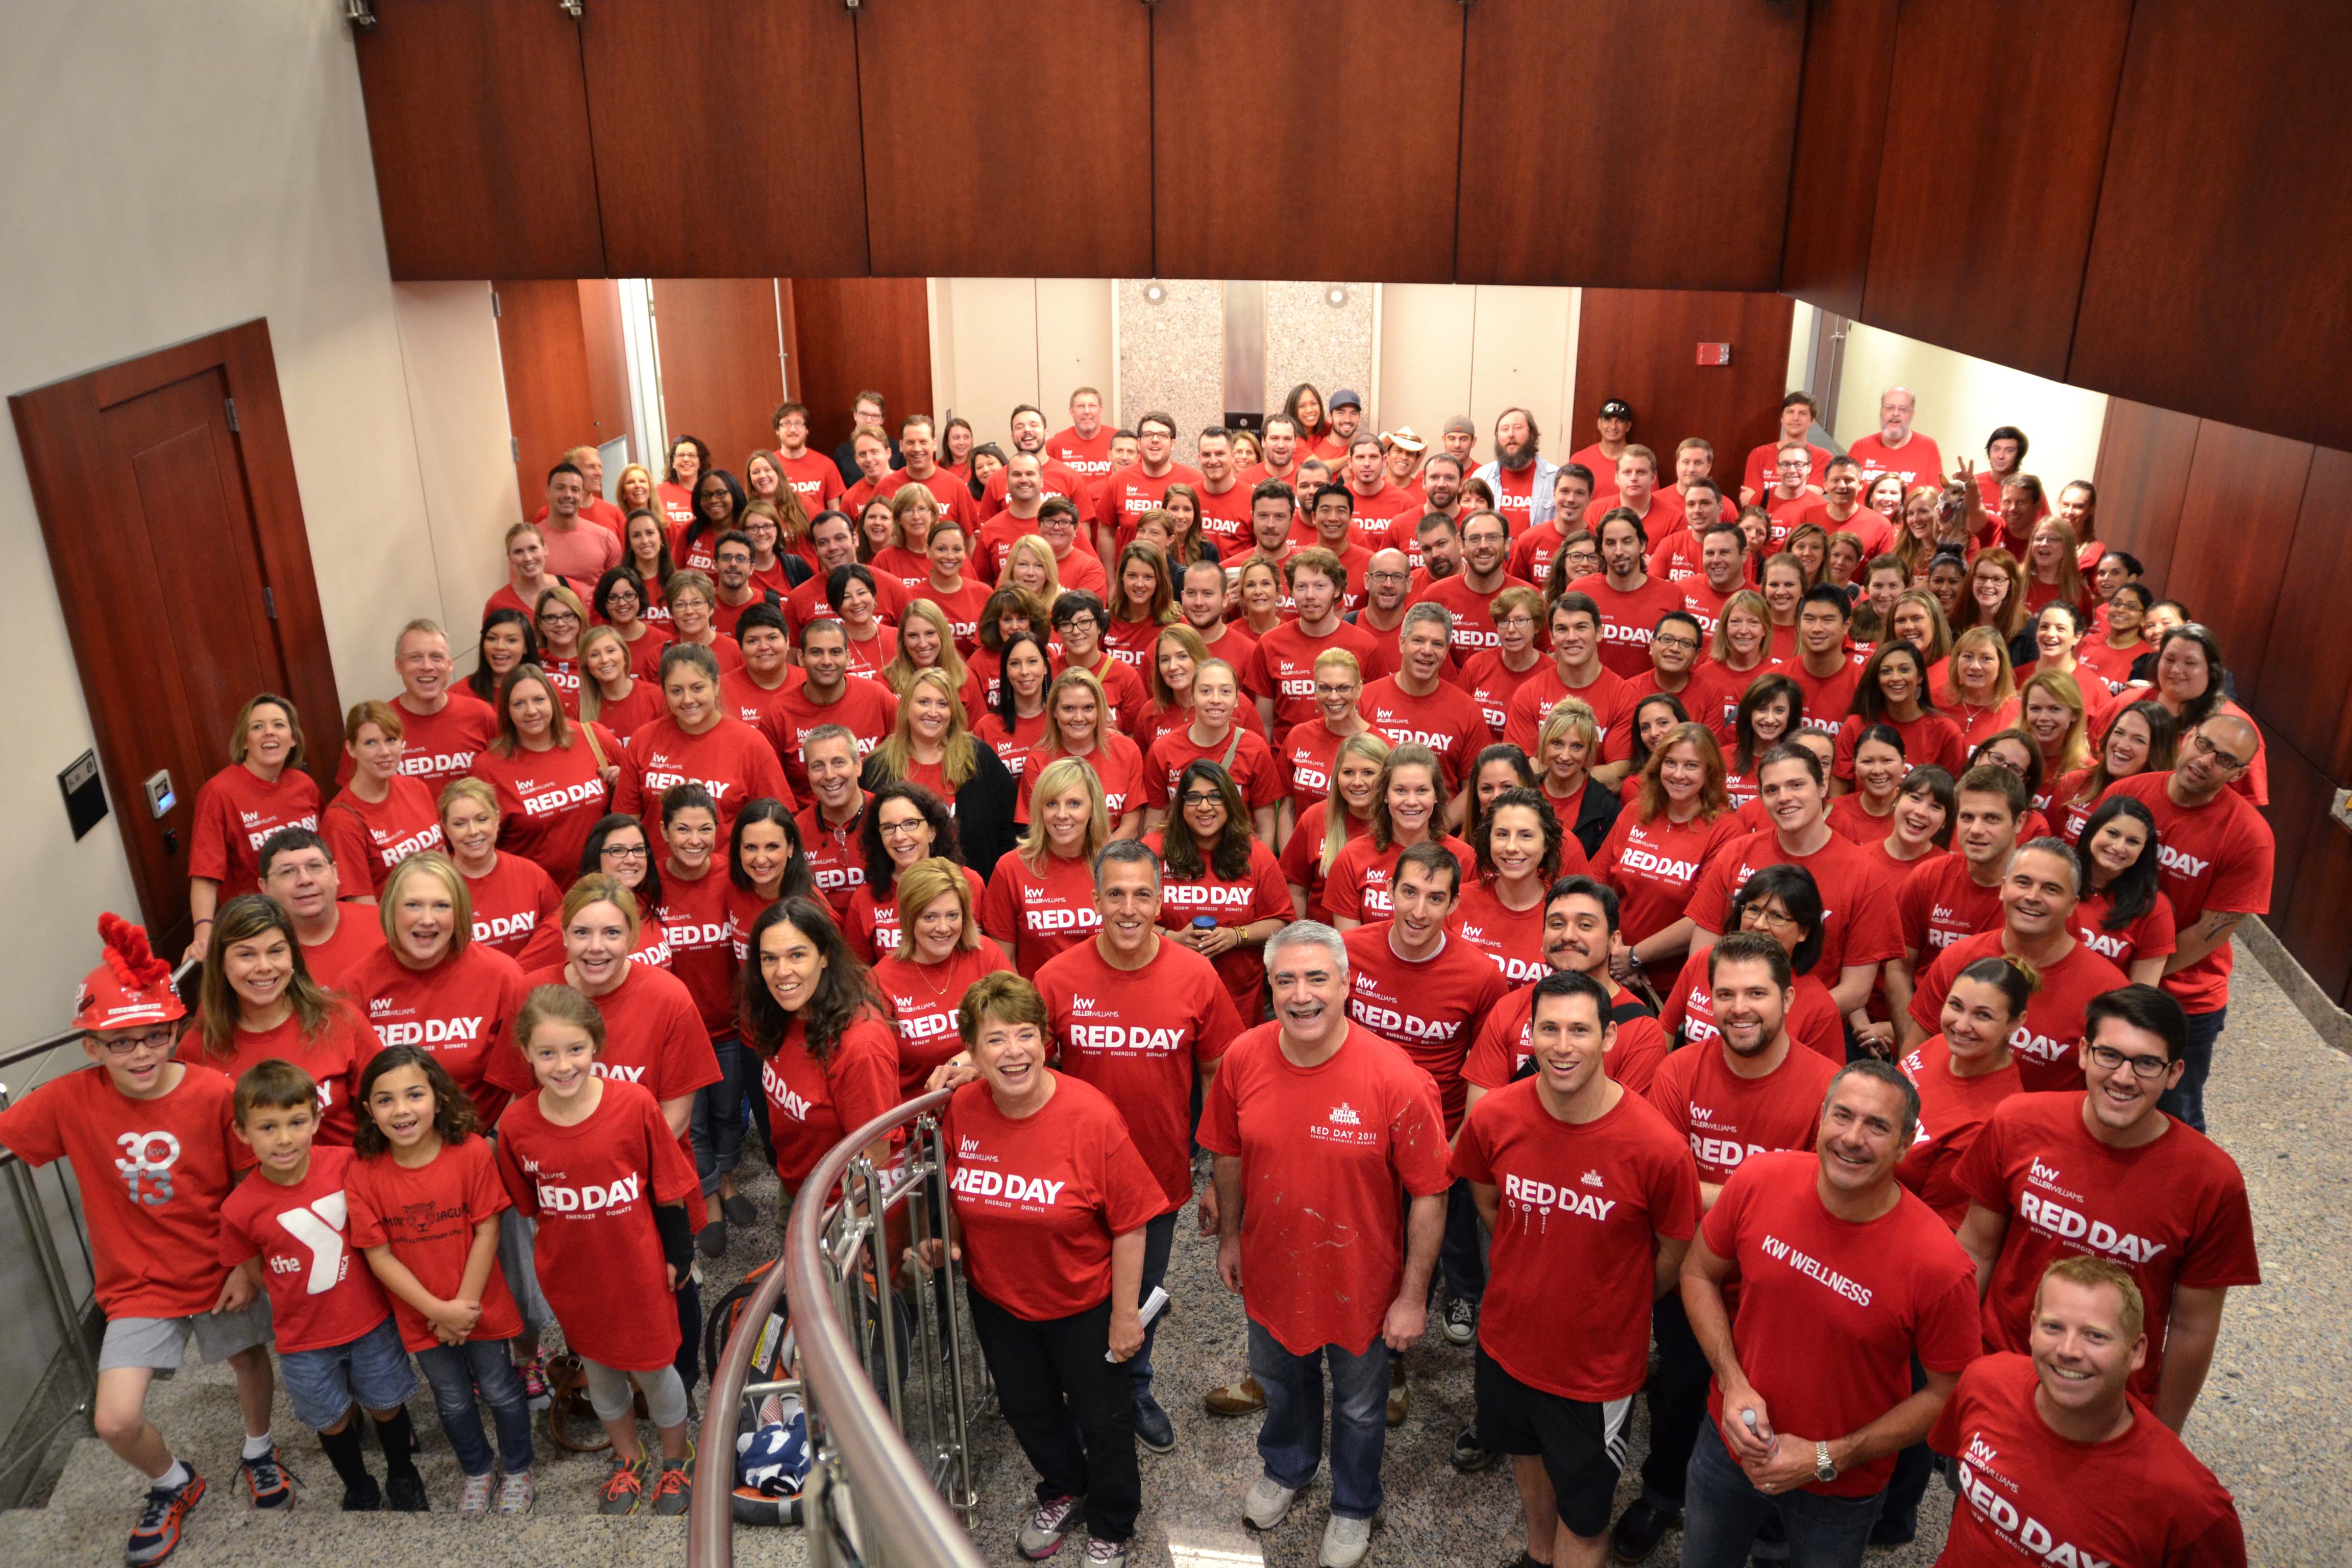 Keller Williams RED Day Revitalizes Communities Around the World